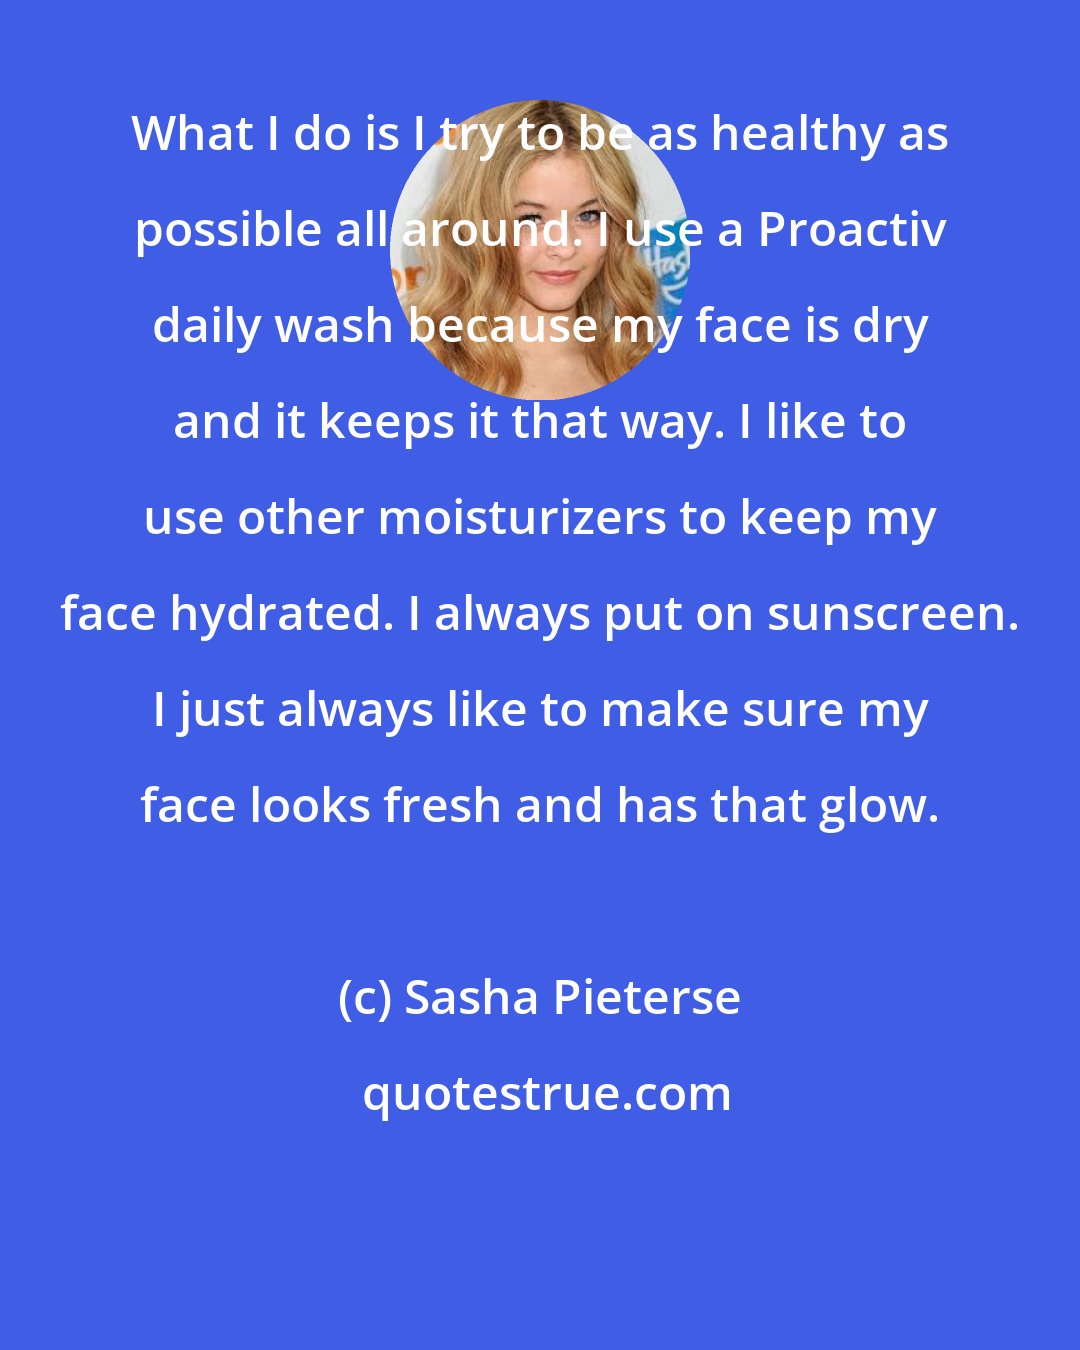 Sasha Pieterse: What I do is I try to be as healthy as possible all around. I use a Proactiv daily wash because my face is dry and it keeps it that way. I like to use other moisturizers to keep my face hydrated. I always put on sunscreen. I just always like to make sure my face looks fresh and has that glow.